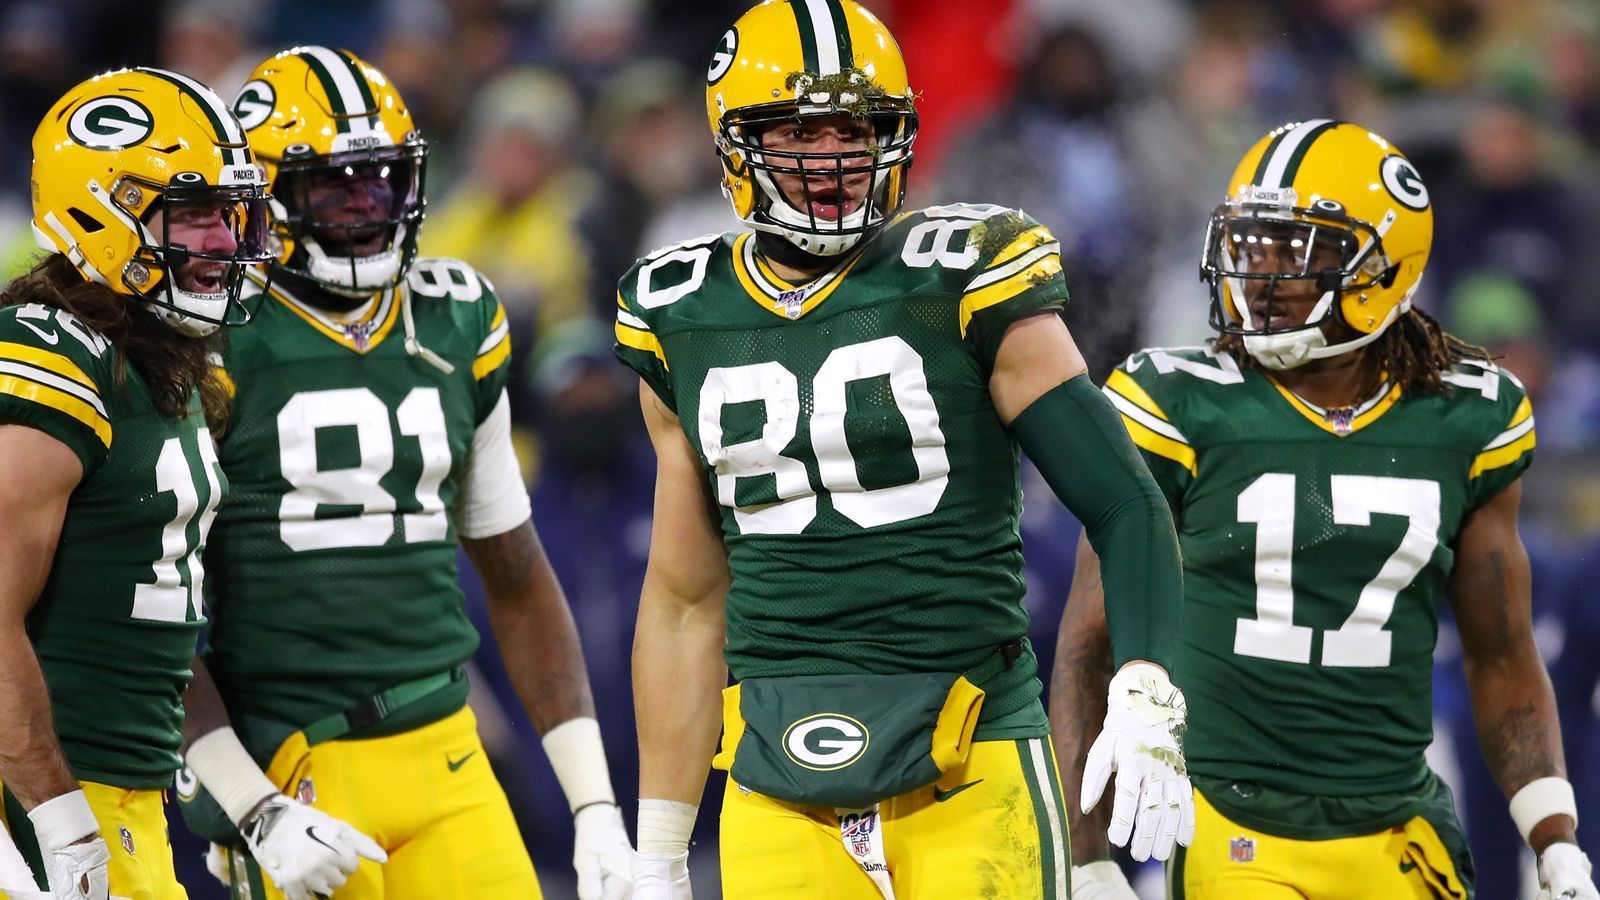 
                <strong>Platz 9: Green Bay Packers</strong><br>
                Pro-Bowl-Selections insgesamt: 55
              